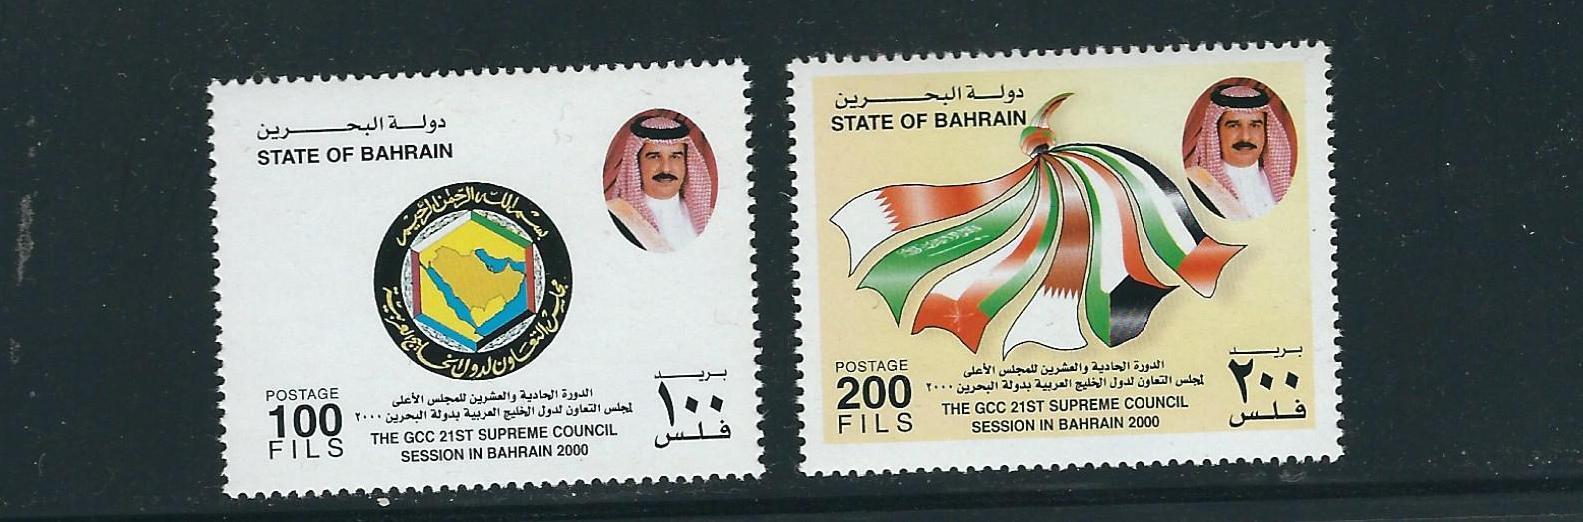 BAHRAIN 2000 Sale price FLAGS Scott 545-46 MNH New products, world's highest quality popular! set complete VF